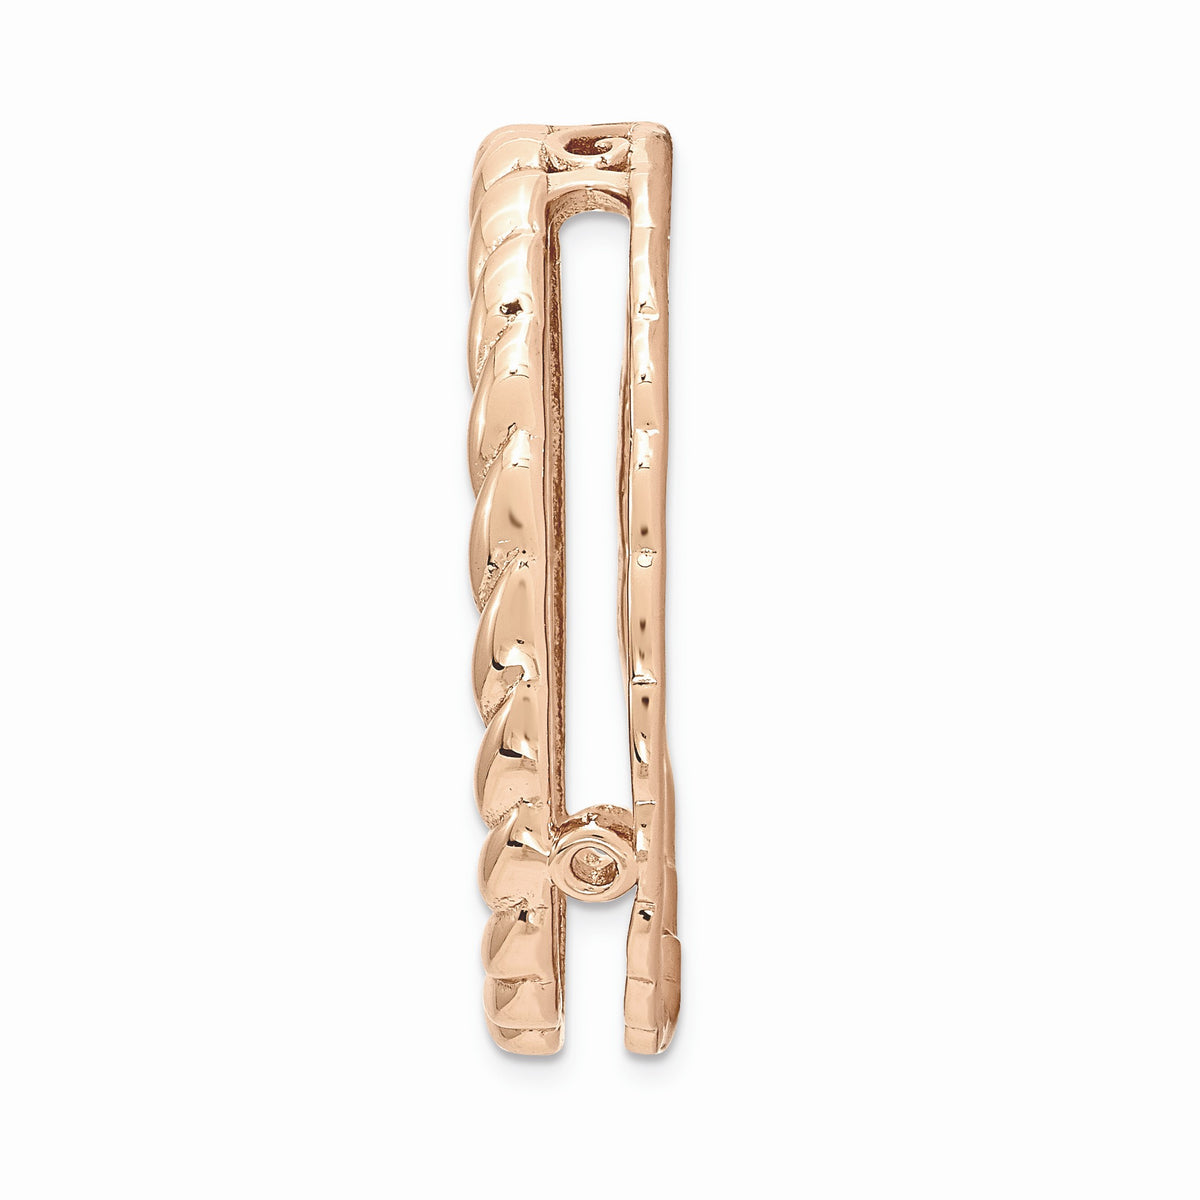 Alternate view of the Rose-Tone Sterling Silver Stackable Medium Rope Slide, 20mm by The Black Bow Jewelry Co.